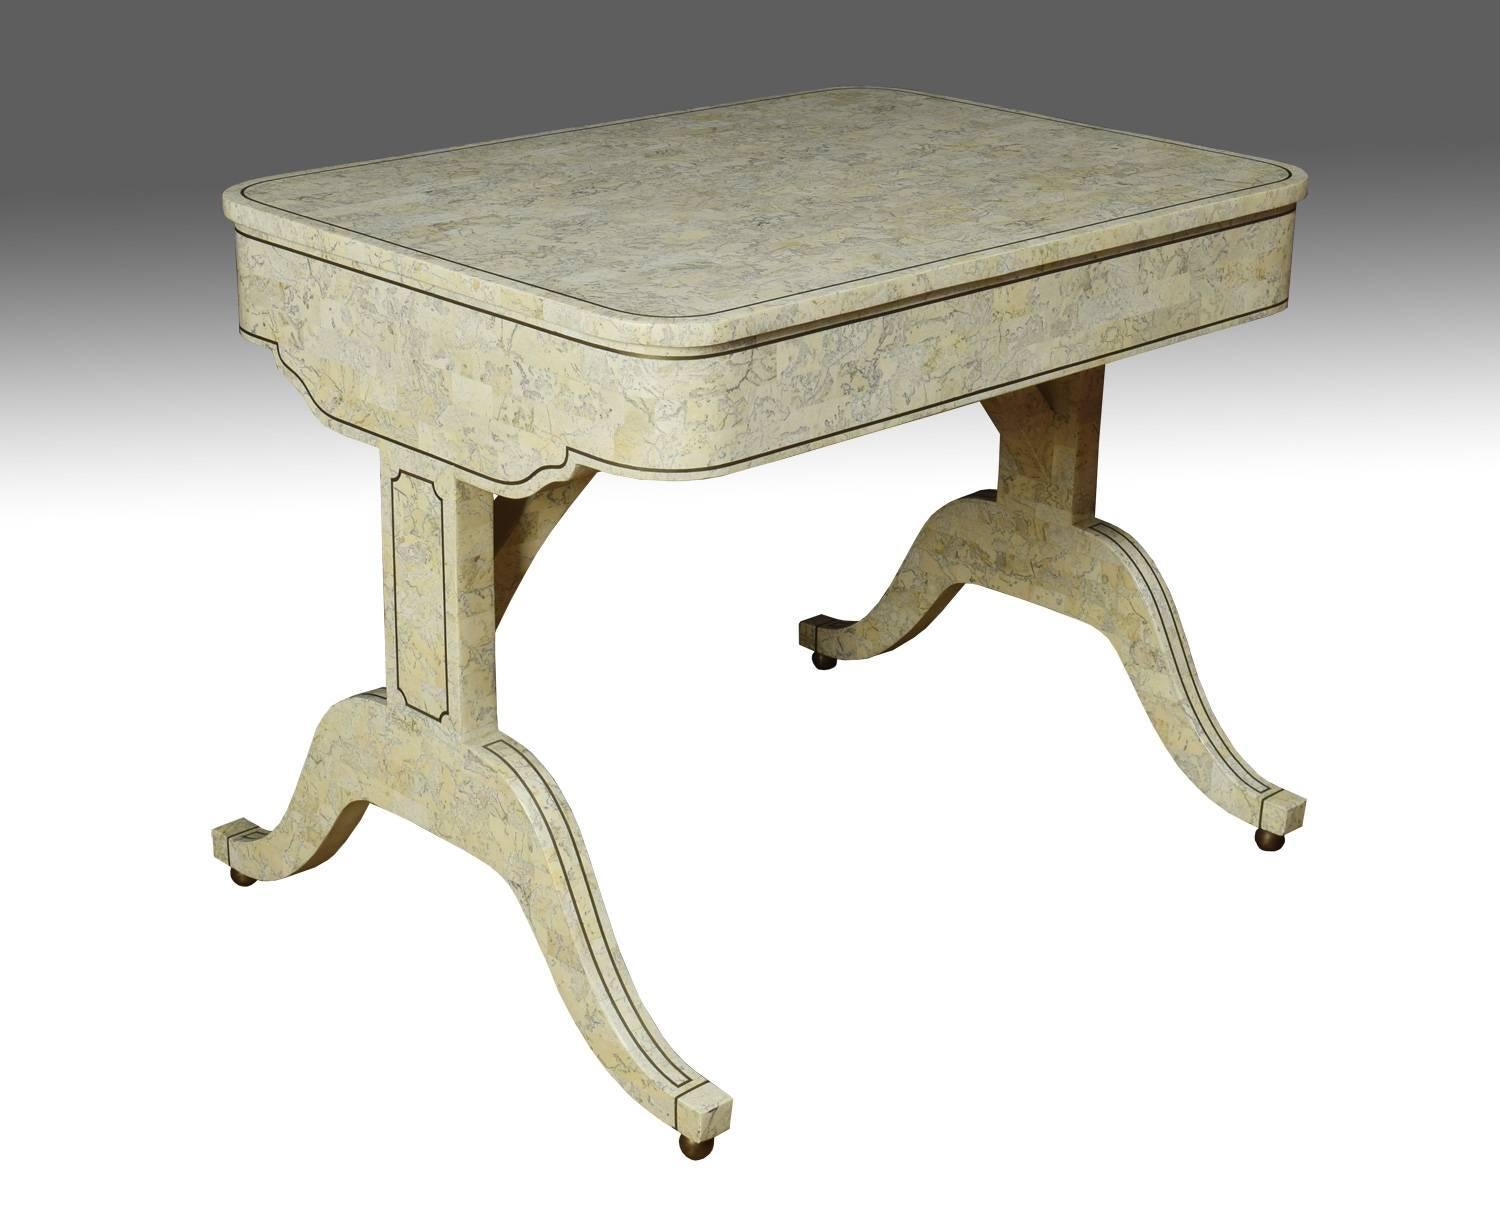 Tesselated stone and brass Regency style sofa table the large rectangular top with rounded corners above two draws standing on splay legs with brass terminals.

Dimensions:
Height 30 inches,
width 37 inches,
depth 26.5 inches.